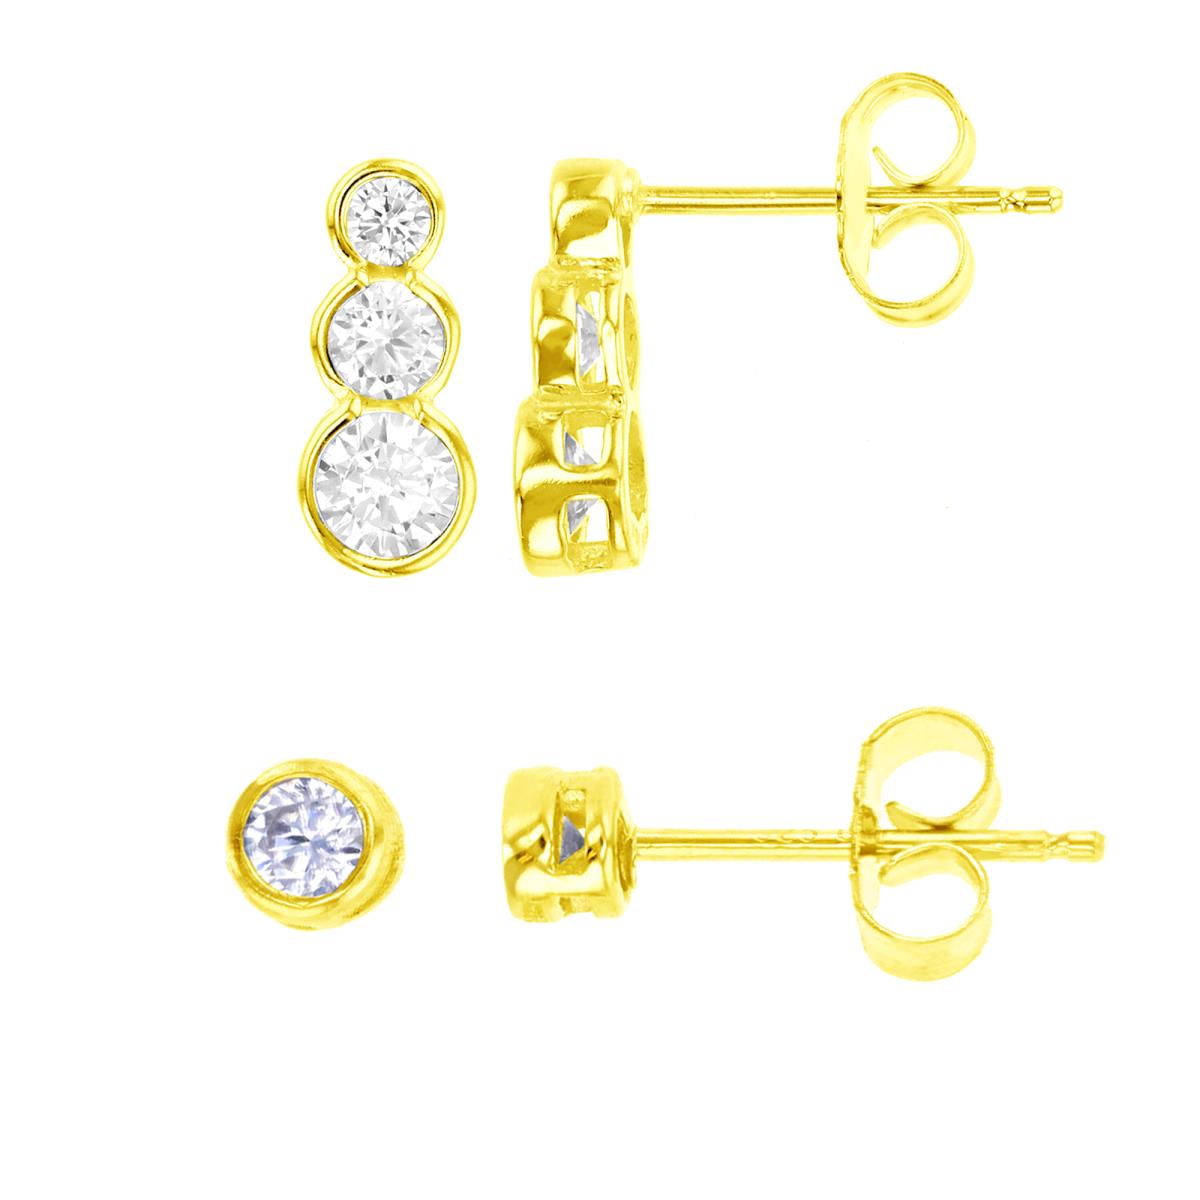 Sterling Silver Yellow Rd White CZ Solitaire & 3 Drop Bezel Stud Earring Kit